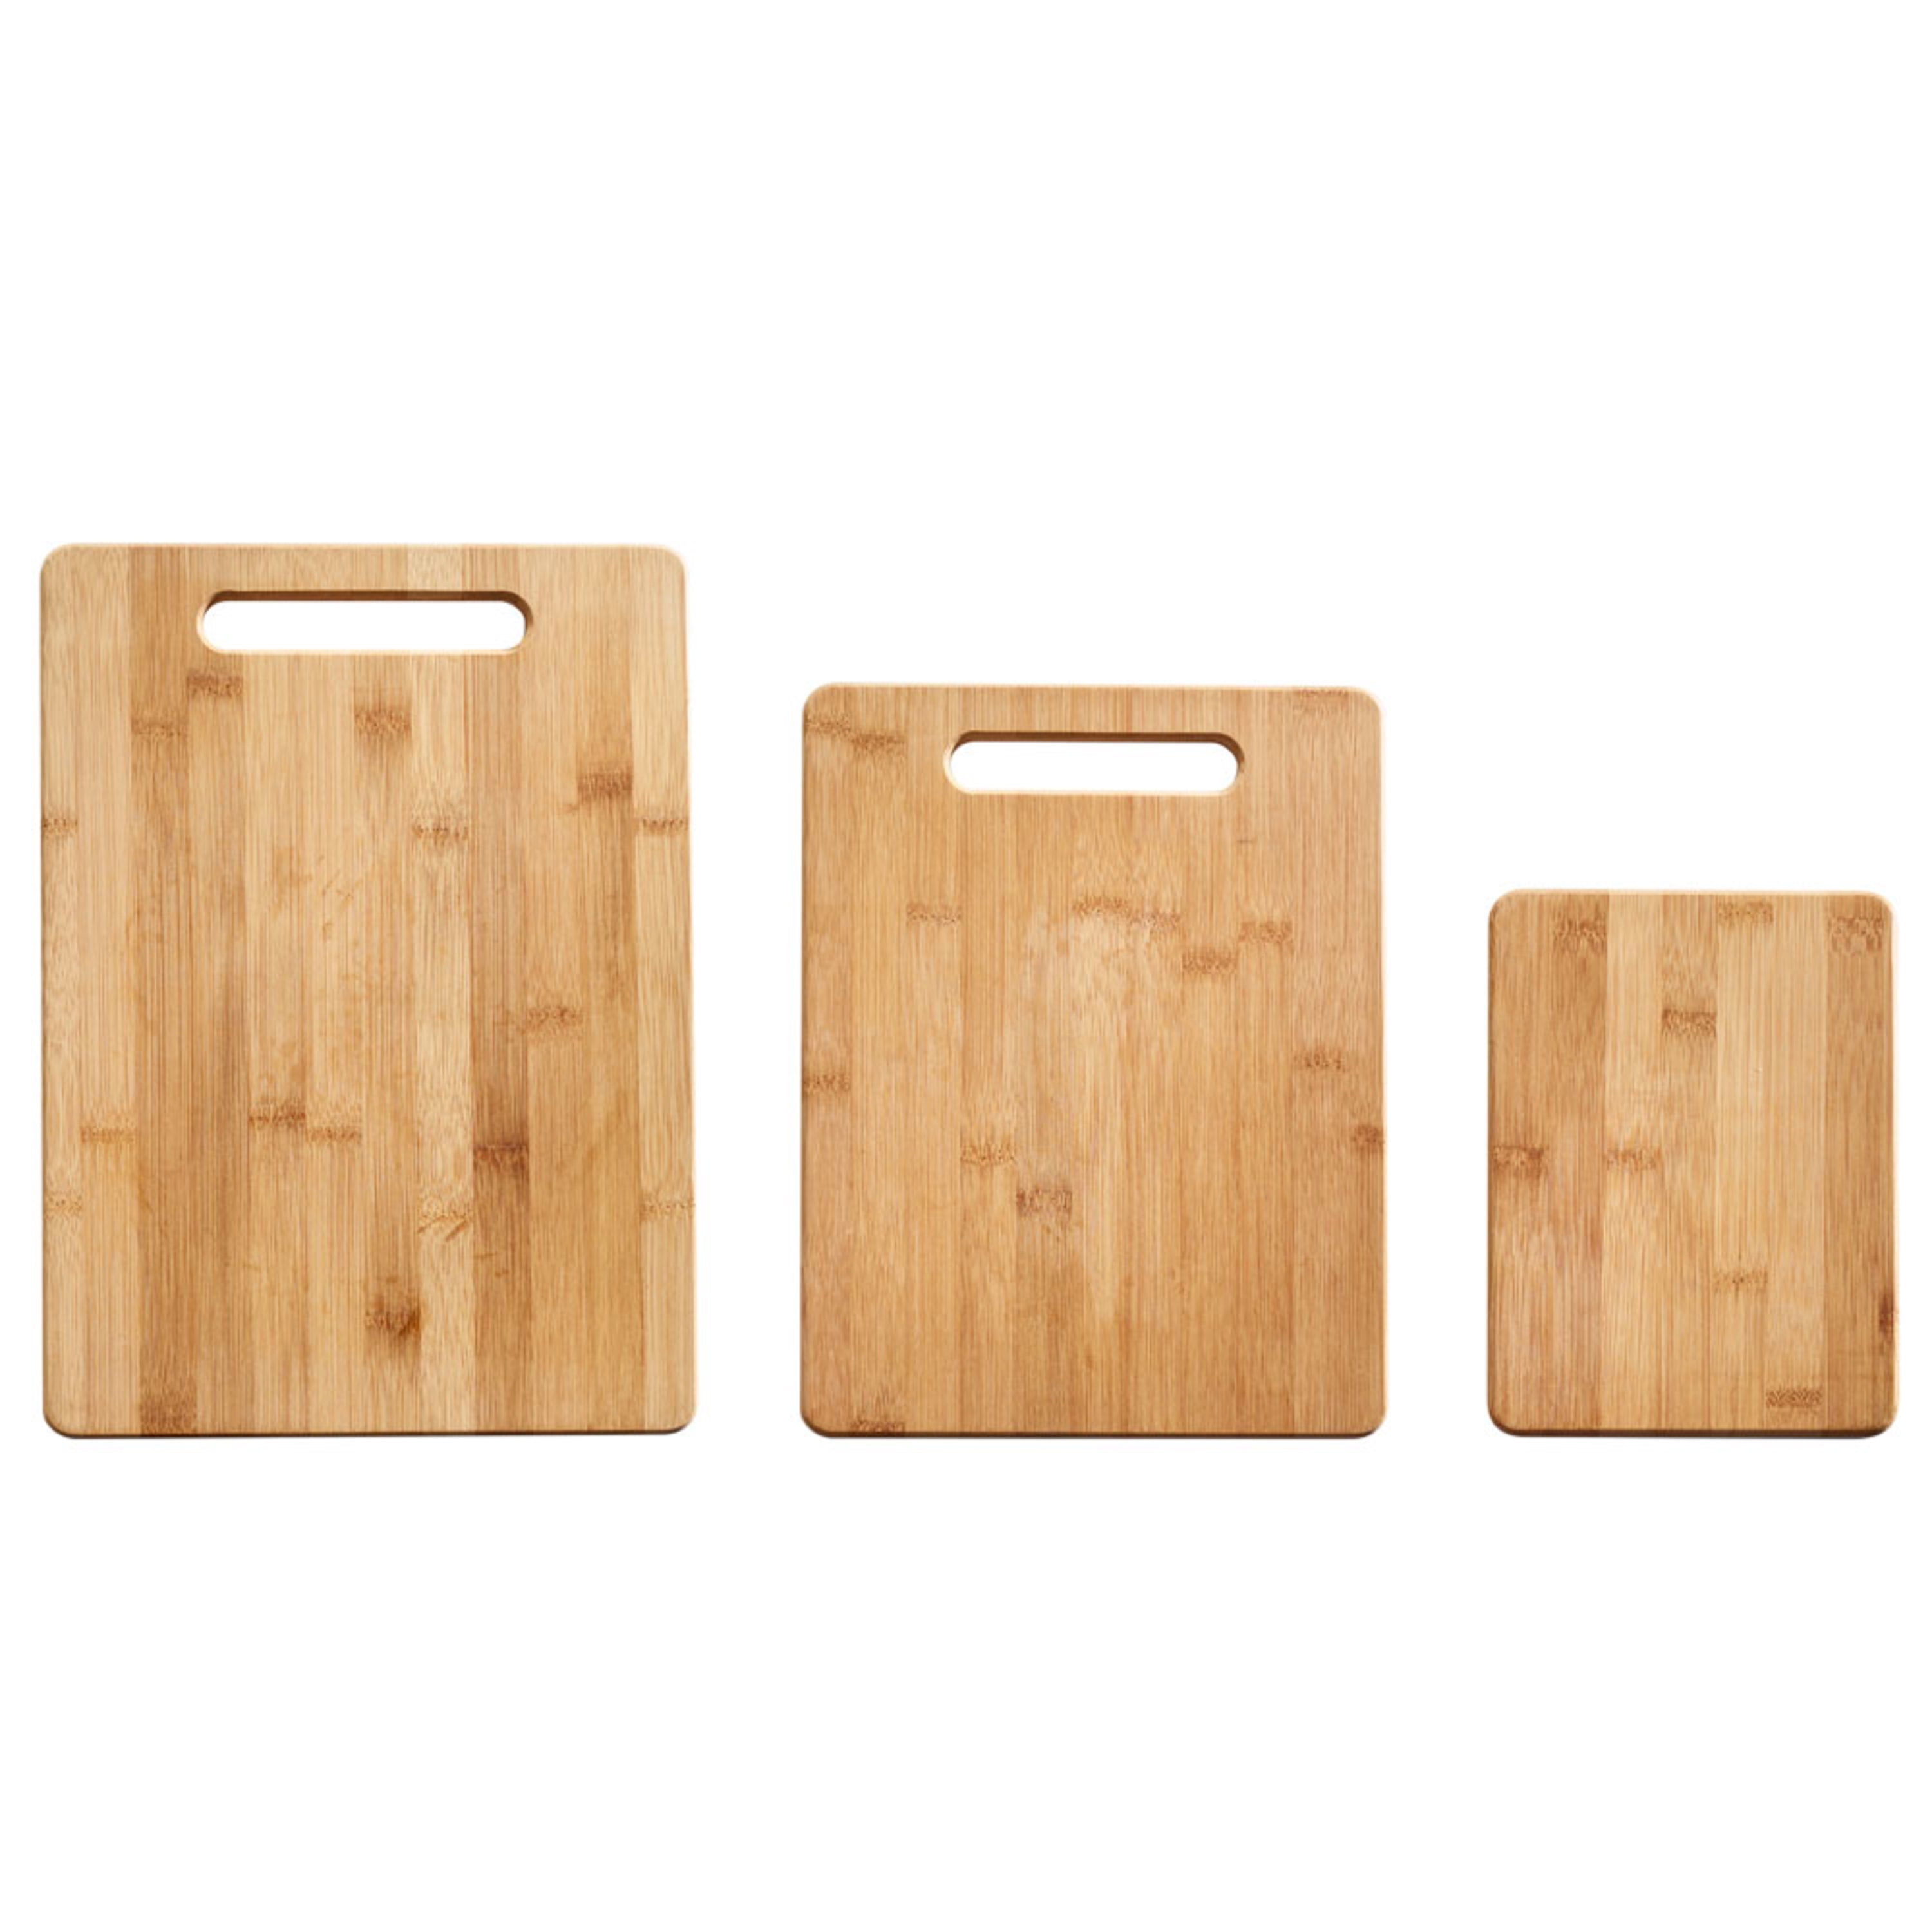 3 Piece Bamboo Chopping Board Set Premium Extra-Thick Wooden Chopping Boards 